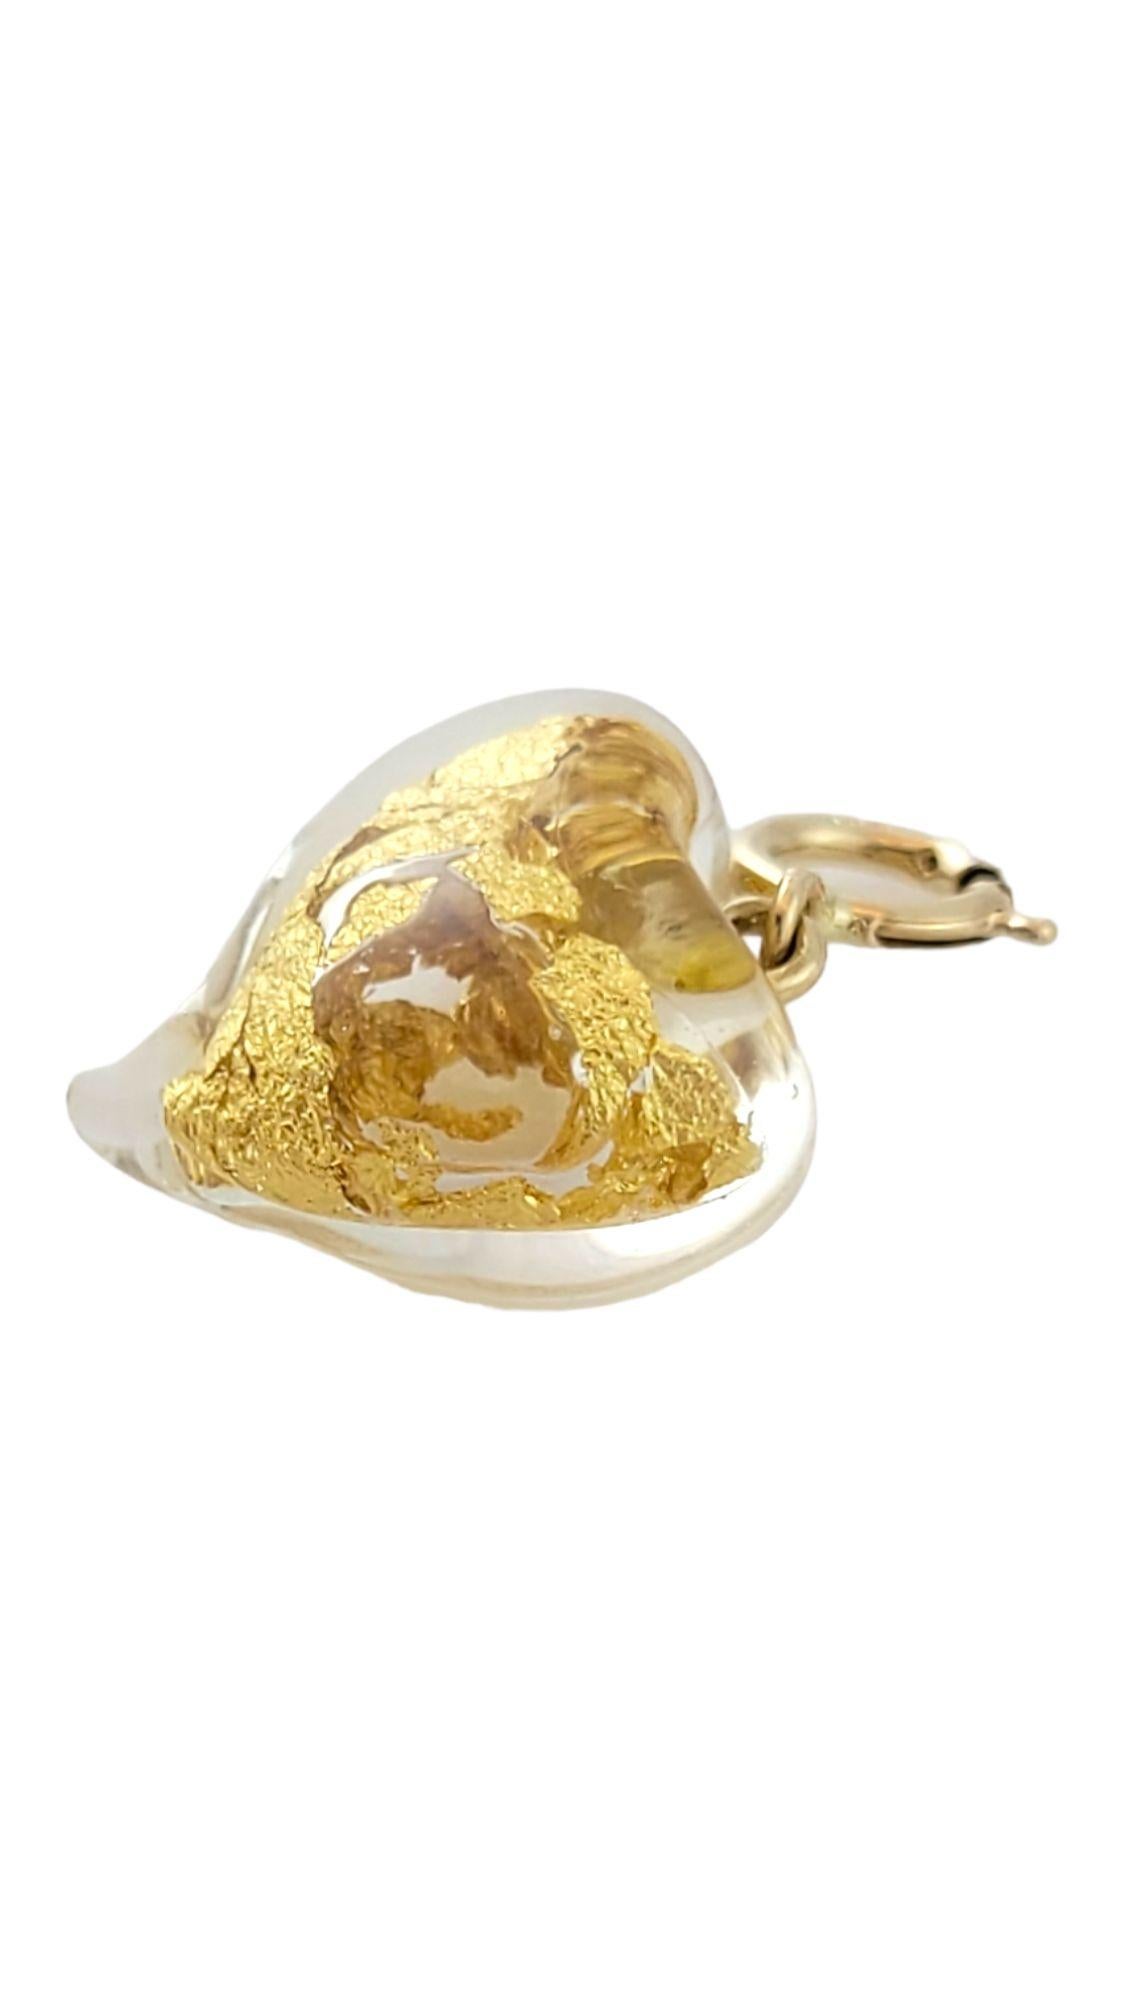 This gorgeous heart pendant is filled with beautiful 14K gold leaf specks!

Size: 15.3mm X 13.9mm X 8.4mm

Length w/ bail: 22mm

Weight: 1.5 g/ 0.9 dwt

Hallmark: 585

Very good condition, professionally polished.

Will come packaged in a gift box